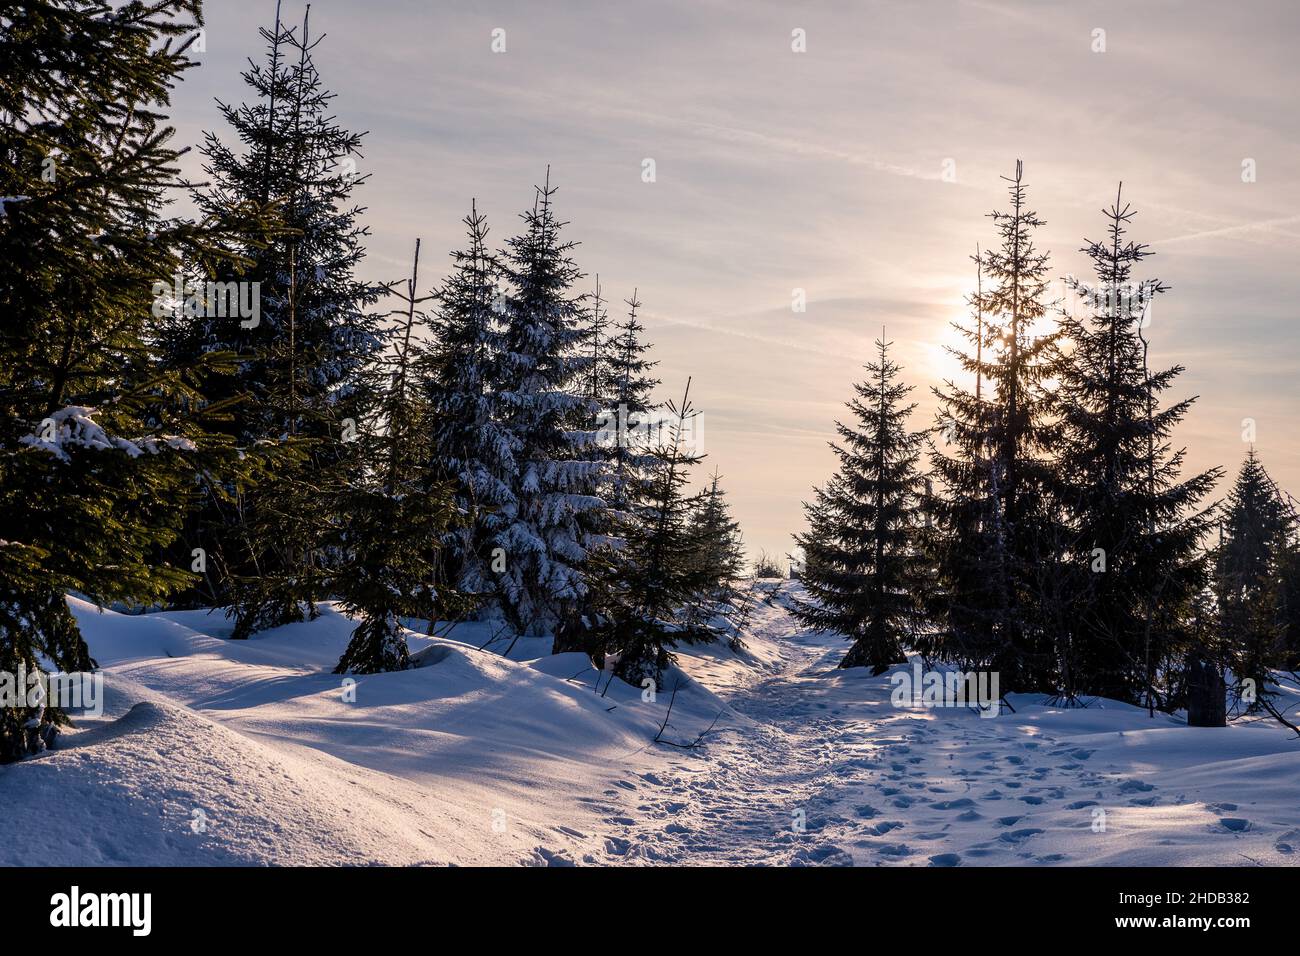 sun behind winter landscape with trees and snow Stock Photo